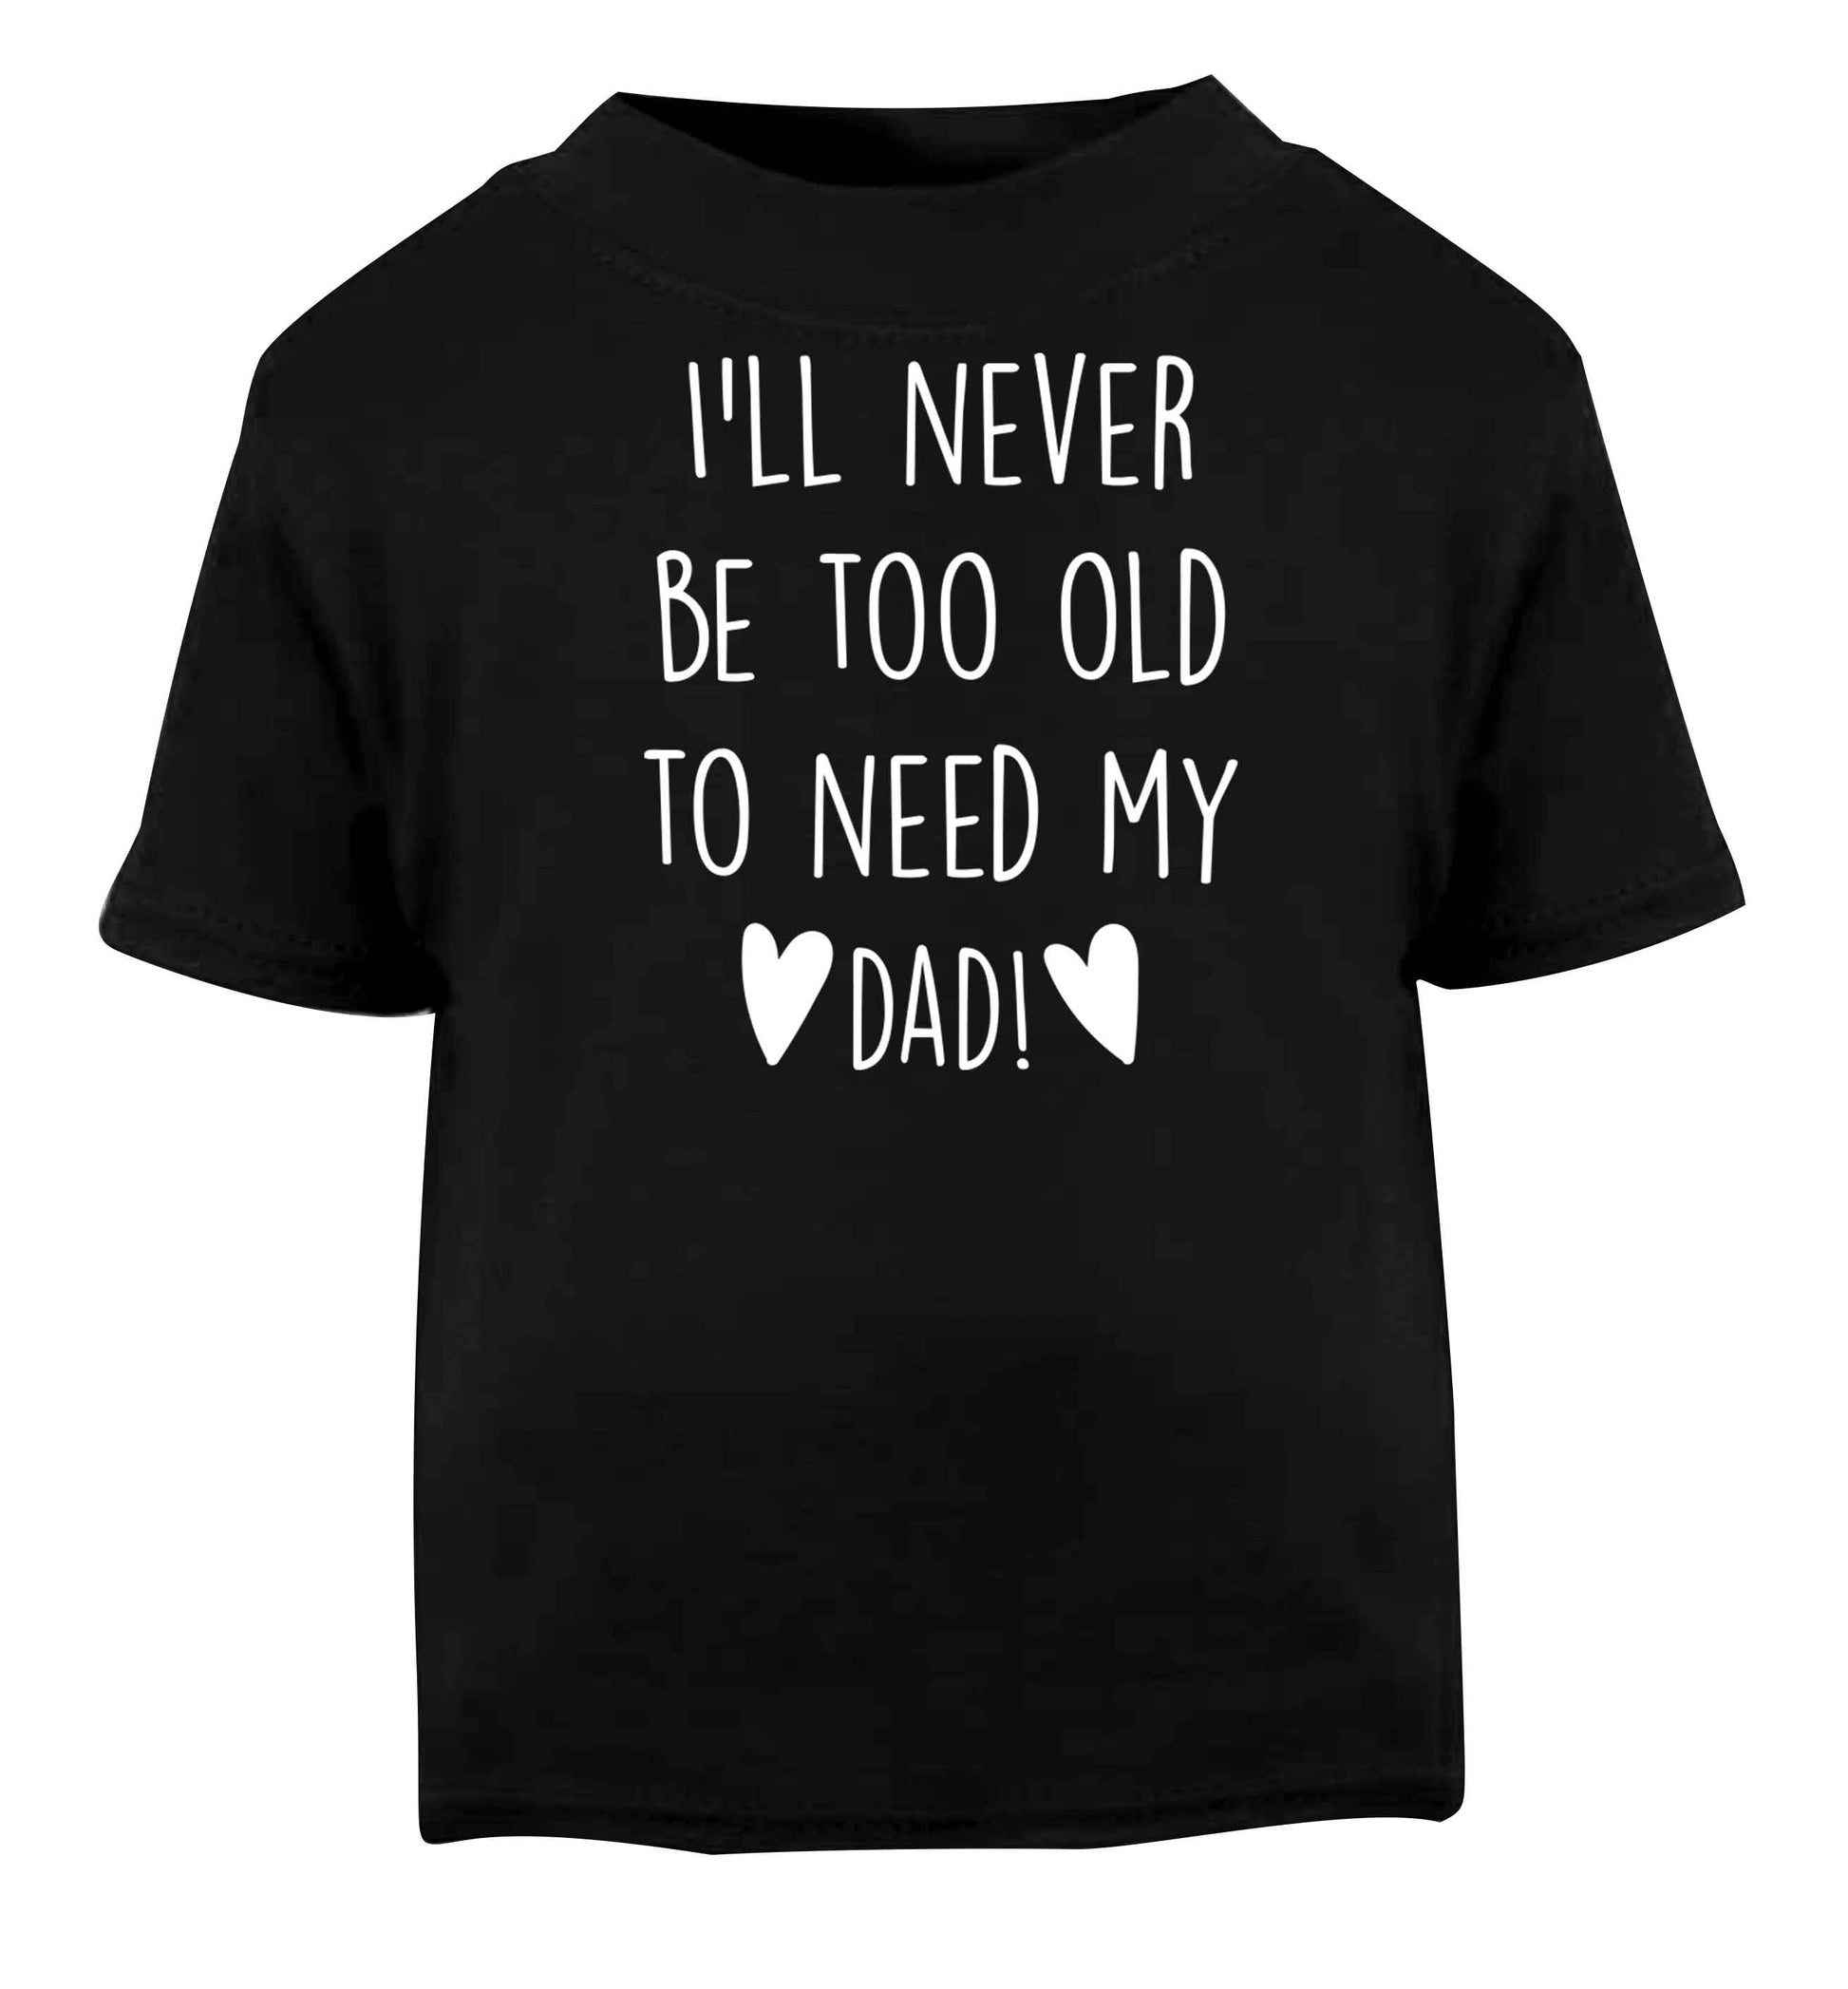 I'll never be too old to need my dad Black baby toddler Tshirt 2 years